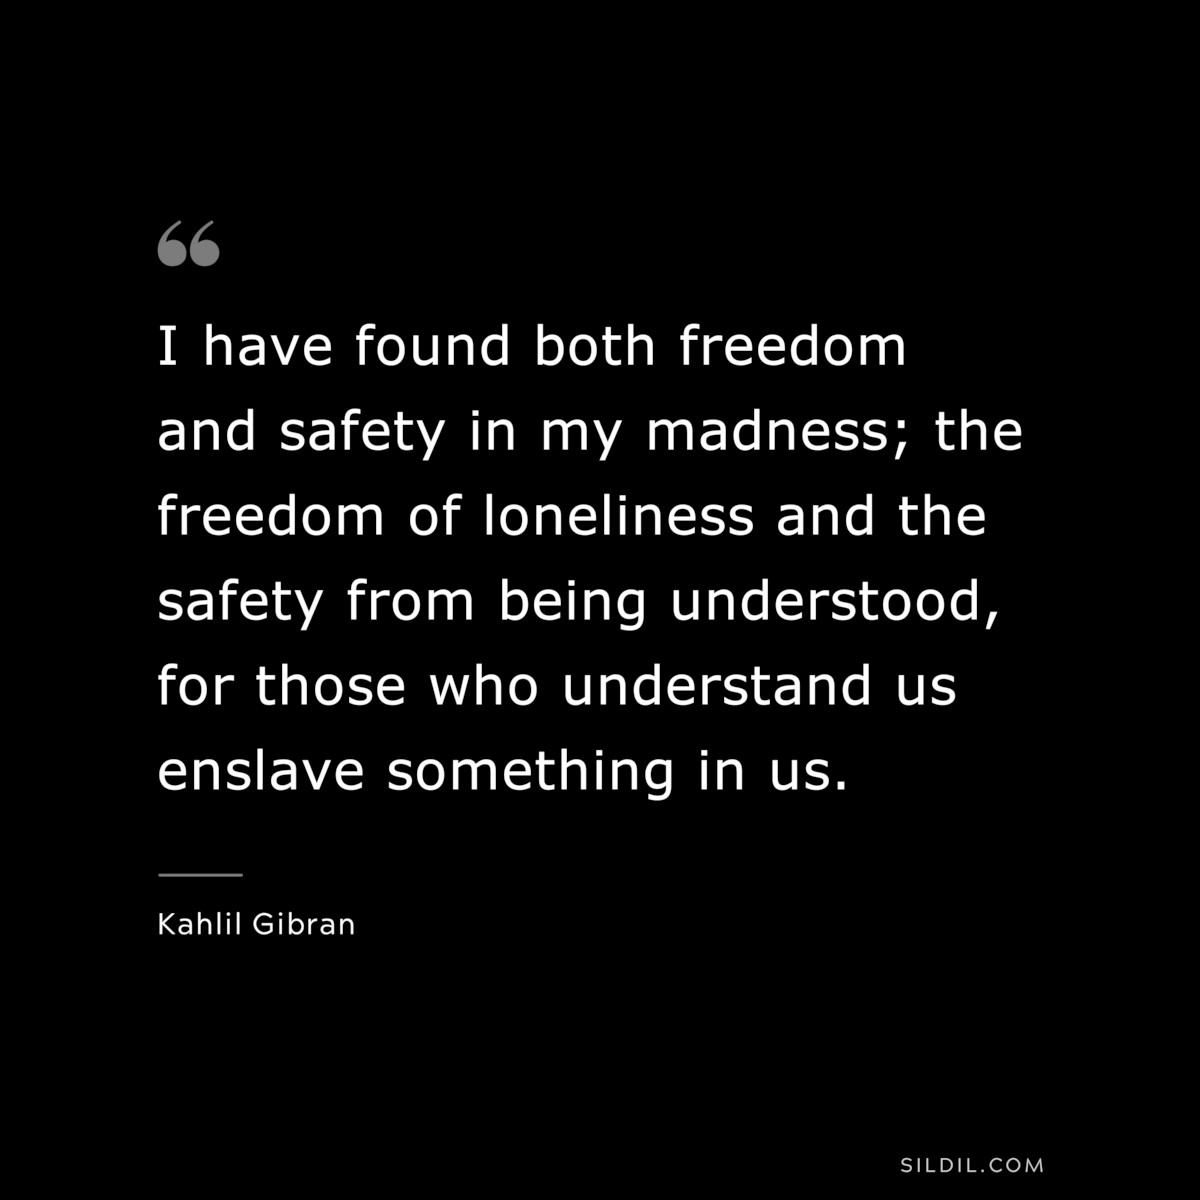 I have found both freedom and safety in my madness; the freedom of loneliness and the safety from being understood, for those who understand us enslave something in us. ― Kahlil Gibran